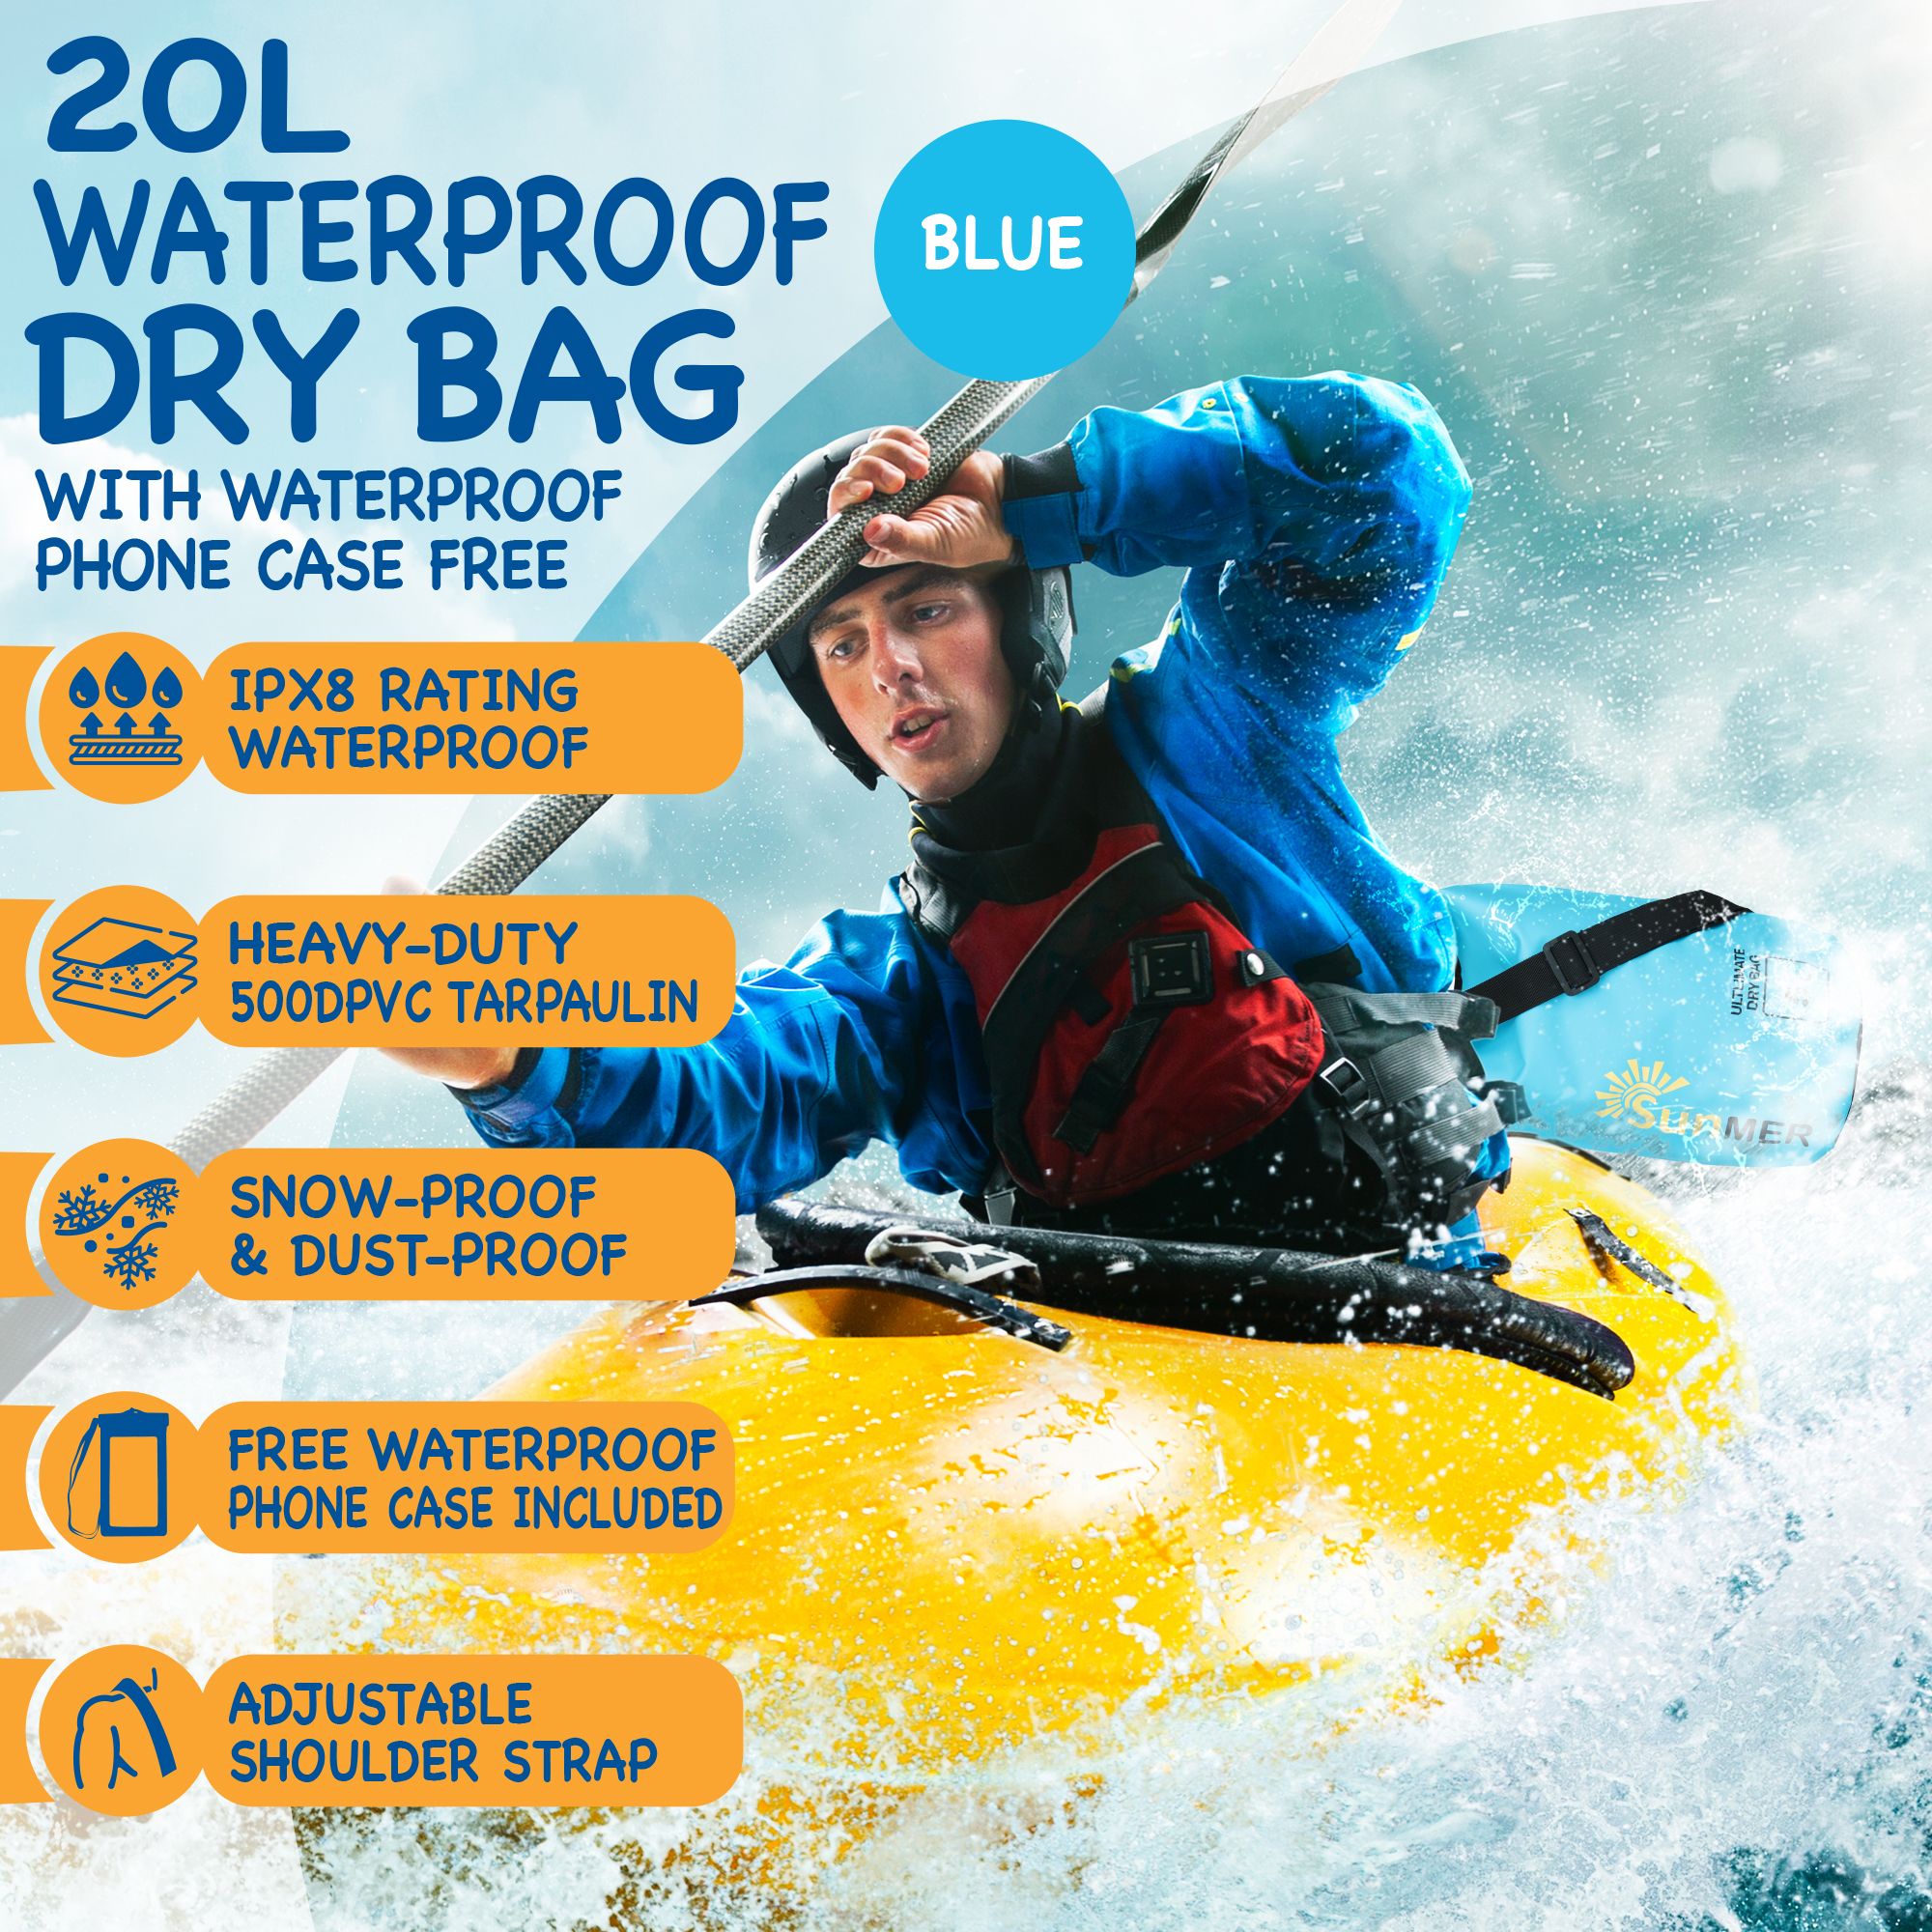 SUNMER 20L Dry Bag With Waterproof Phone Case - Blue